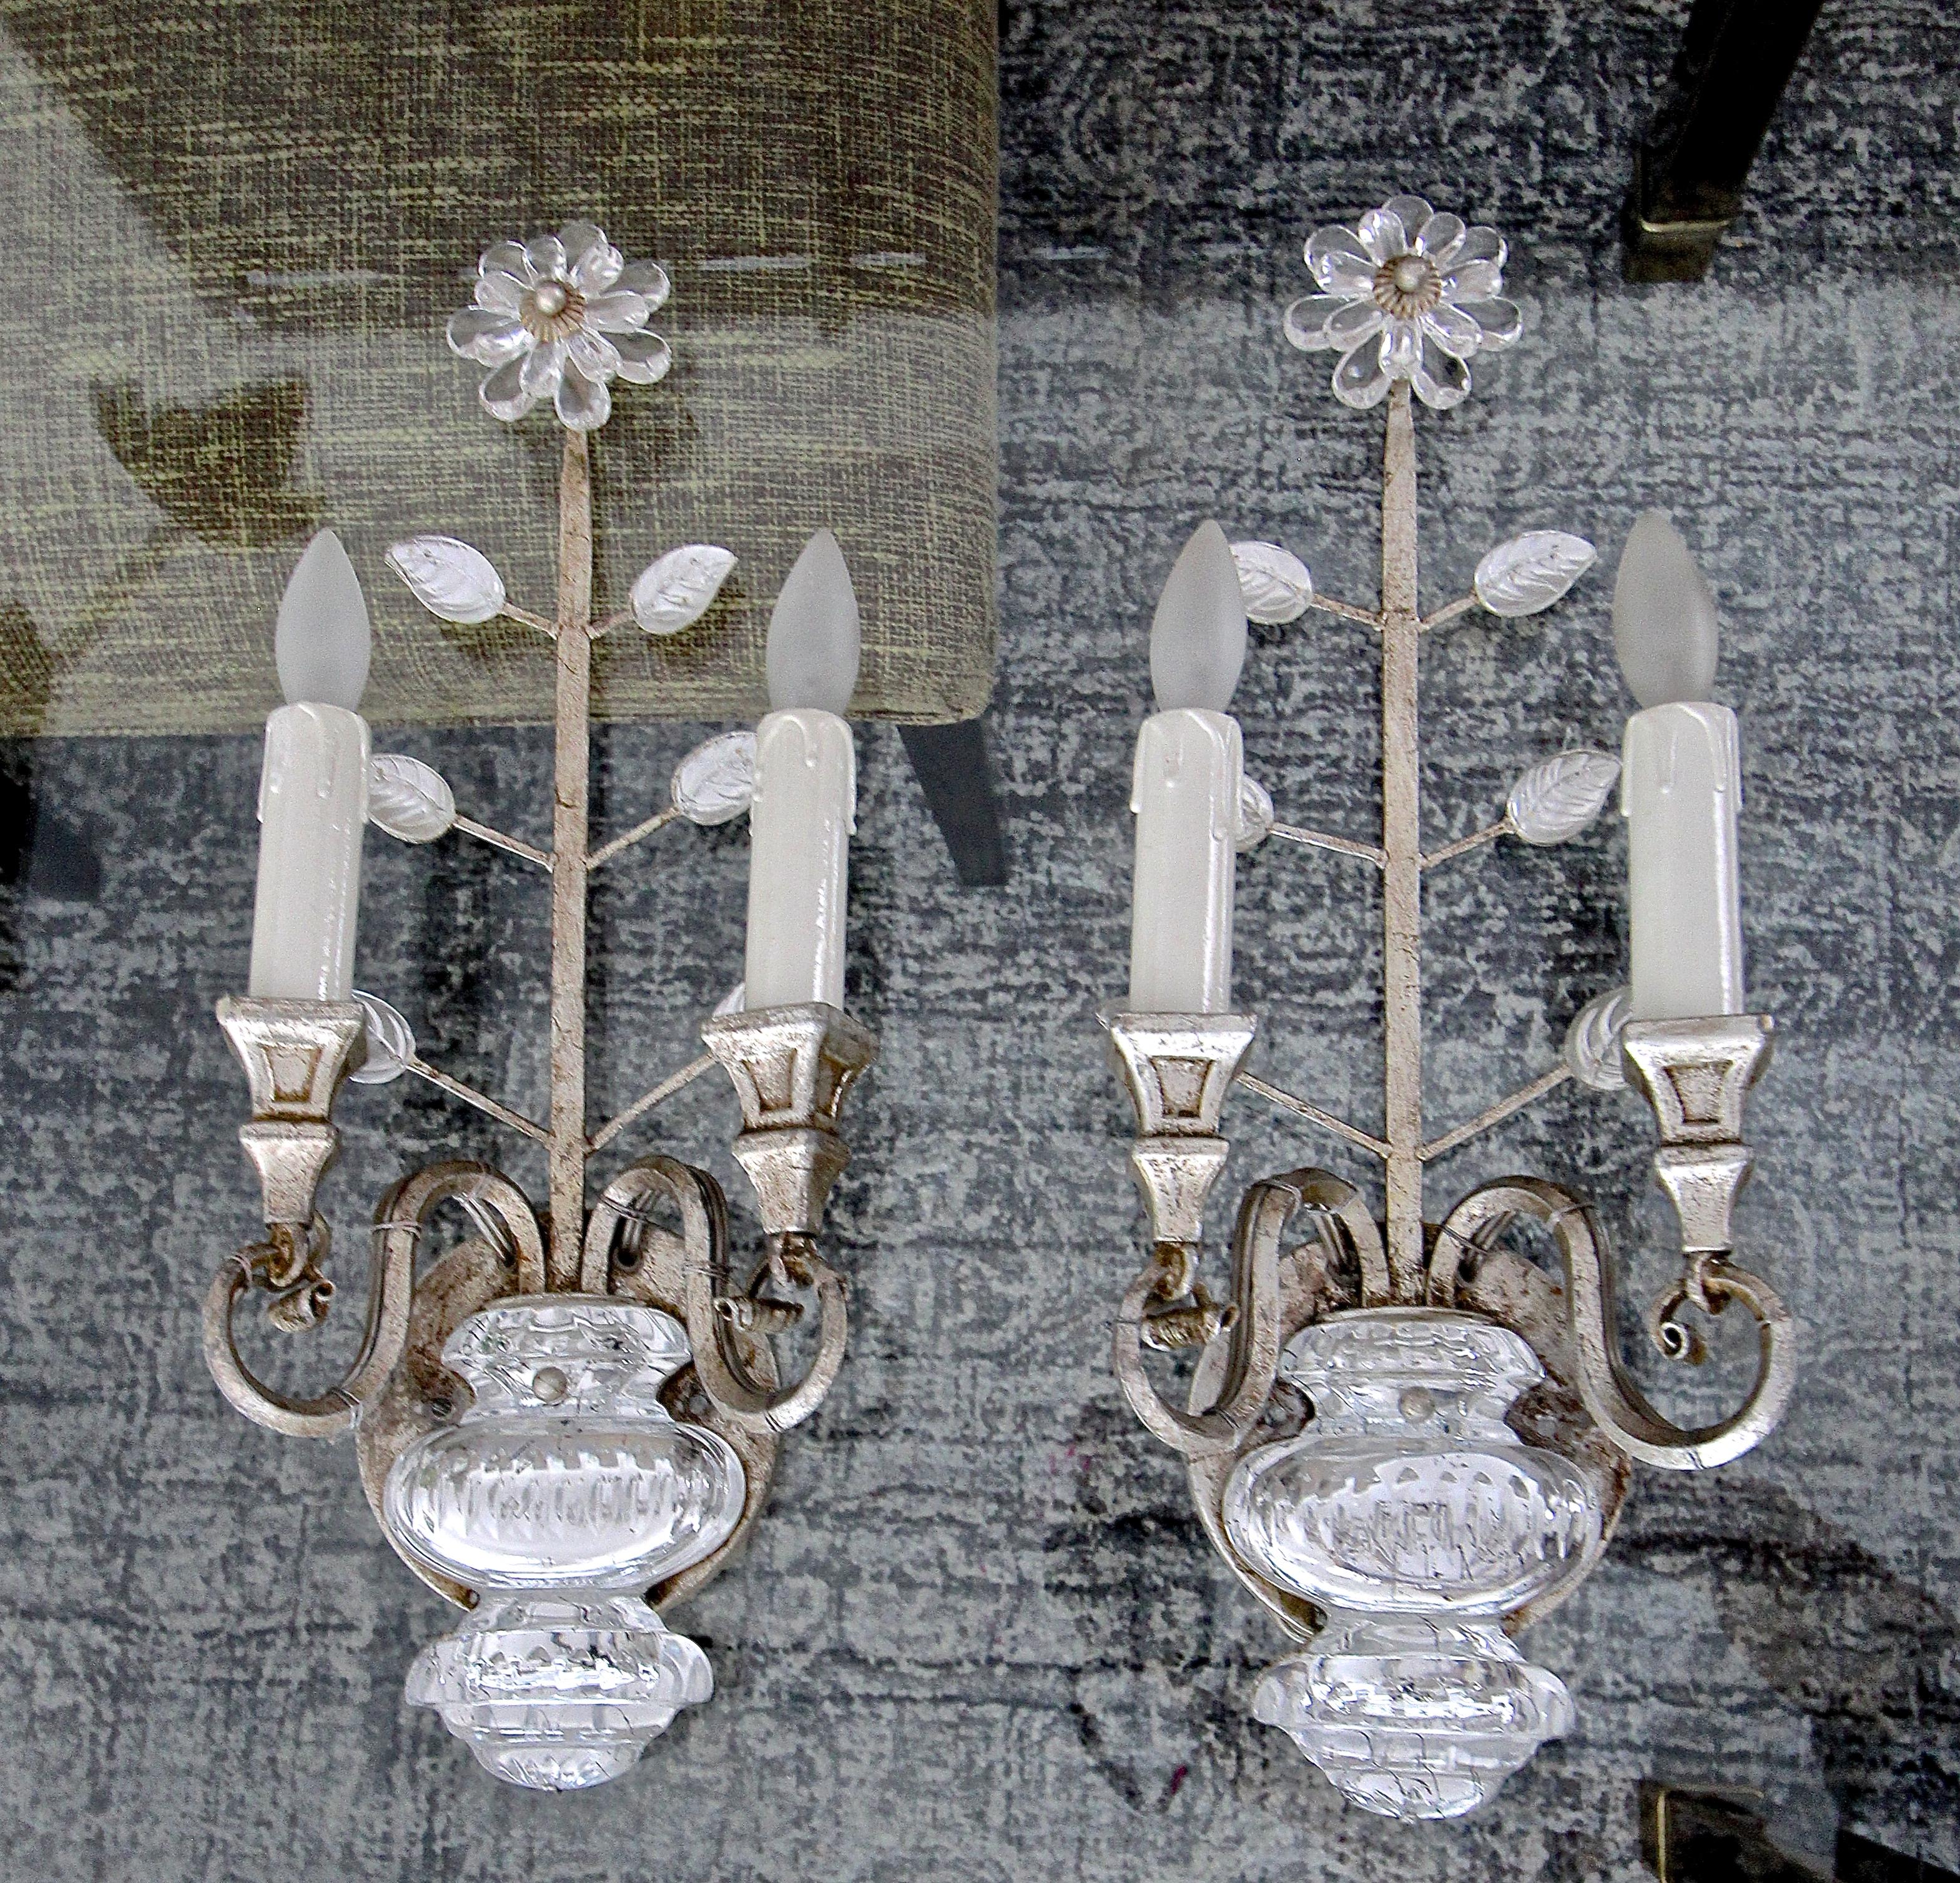 Pair of silver antiqued gilt iron sconces with crystal flower plus leaves and urn motif by Banci Firenze of Italy. Each sconce uses two candelabra base bulbs. Style of the sconces In the manner of Maison Baguès. Newly rewired for US.